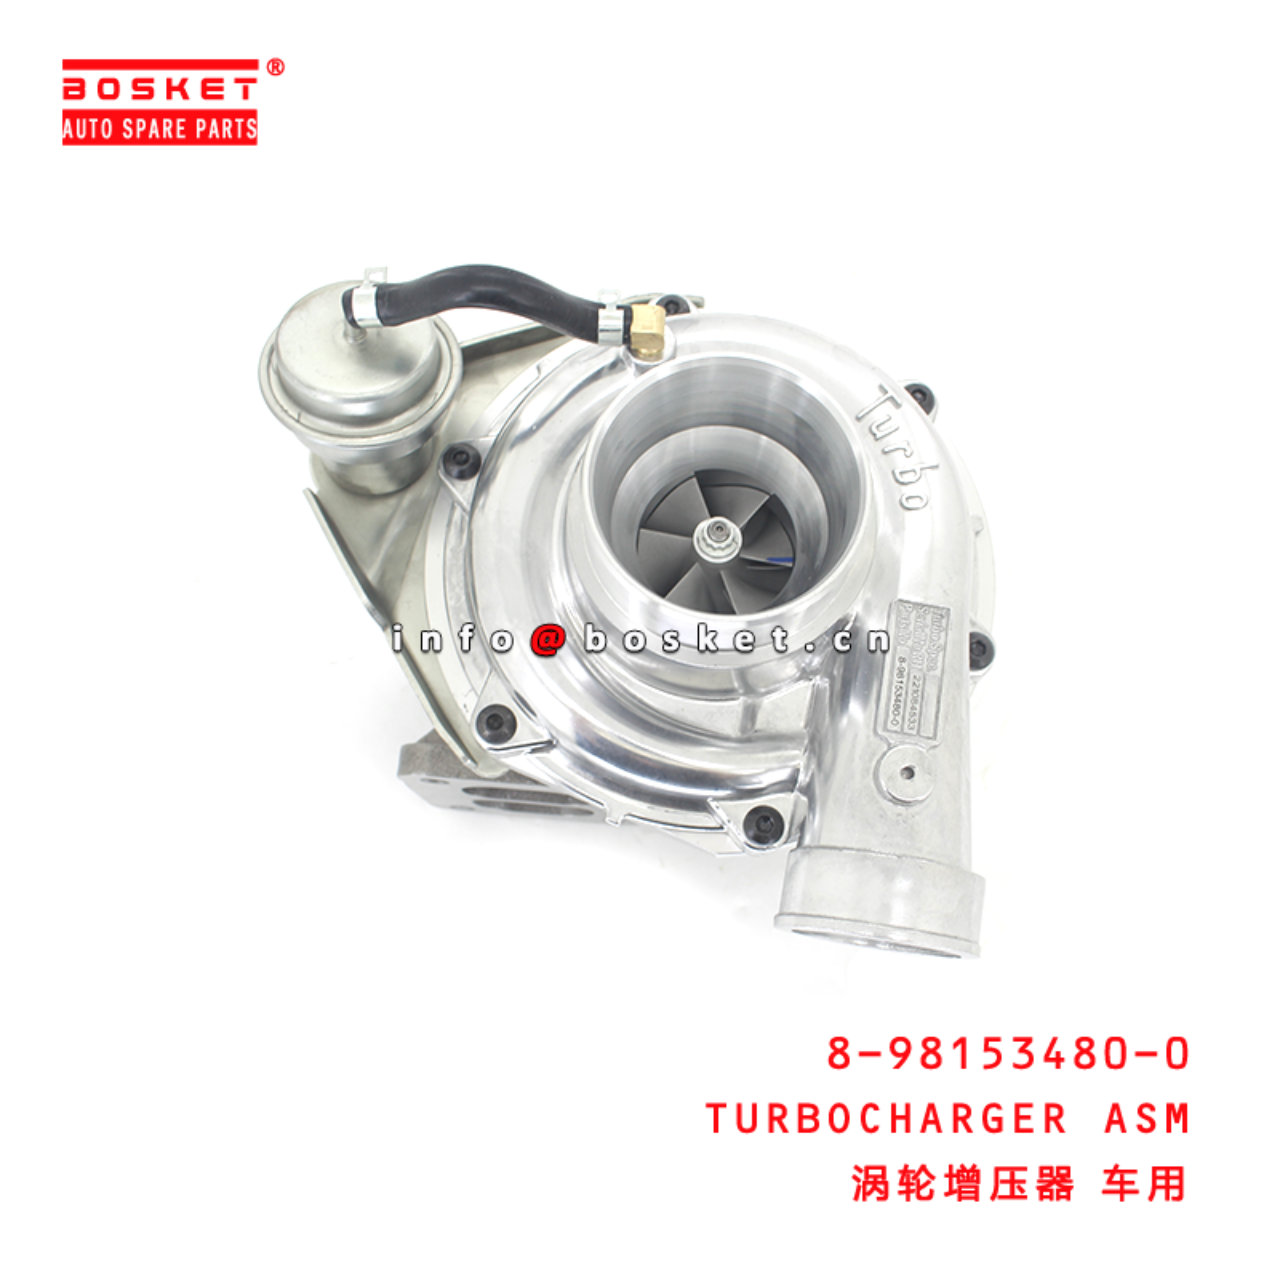 8-98153480-0 Turbocharger Assembly suitable for ISUZU 6HK1T 8981534800